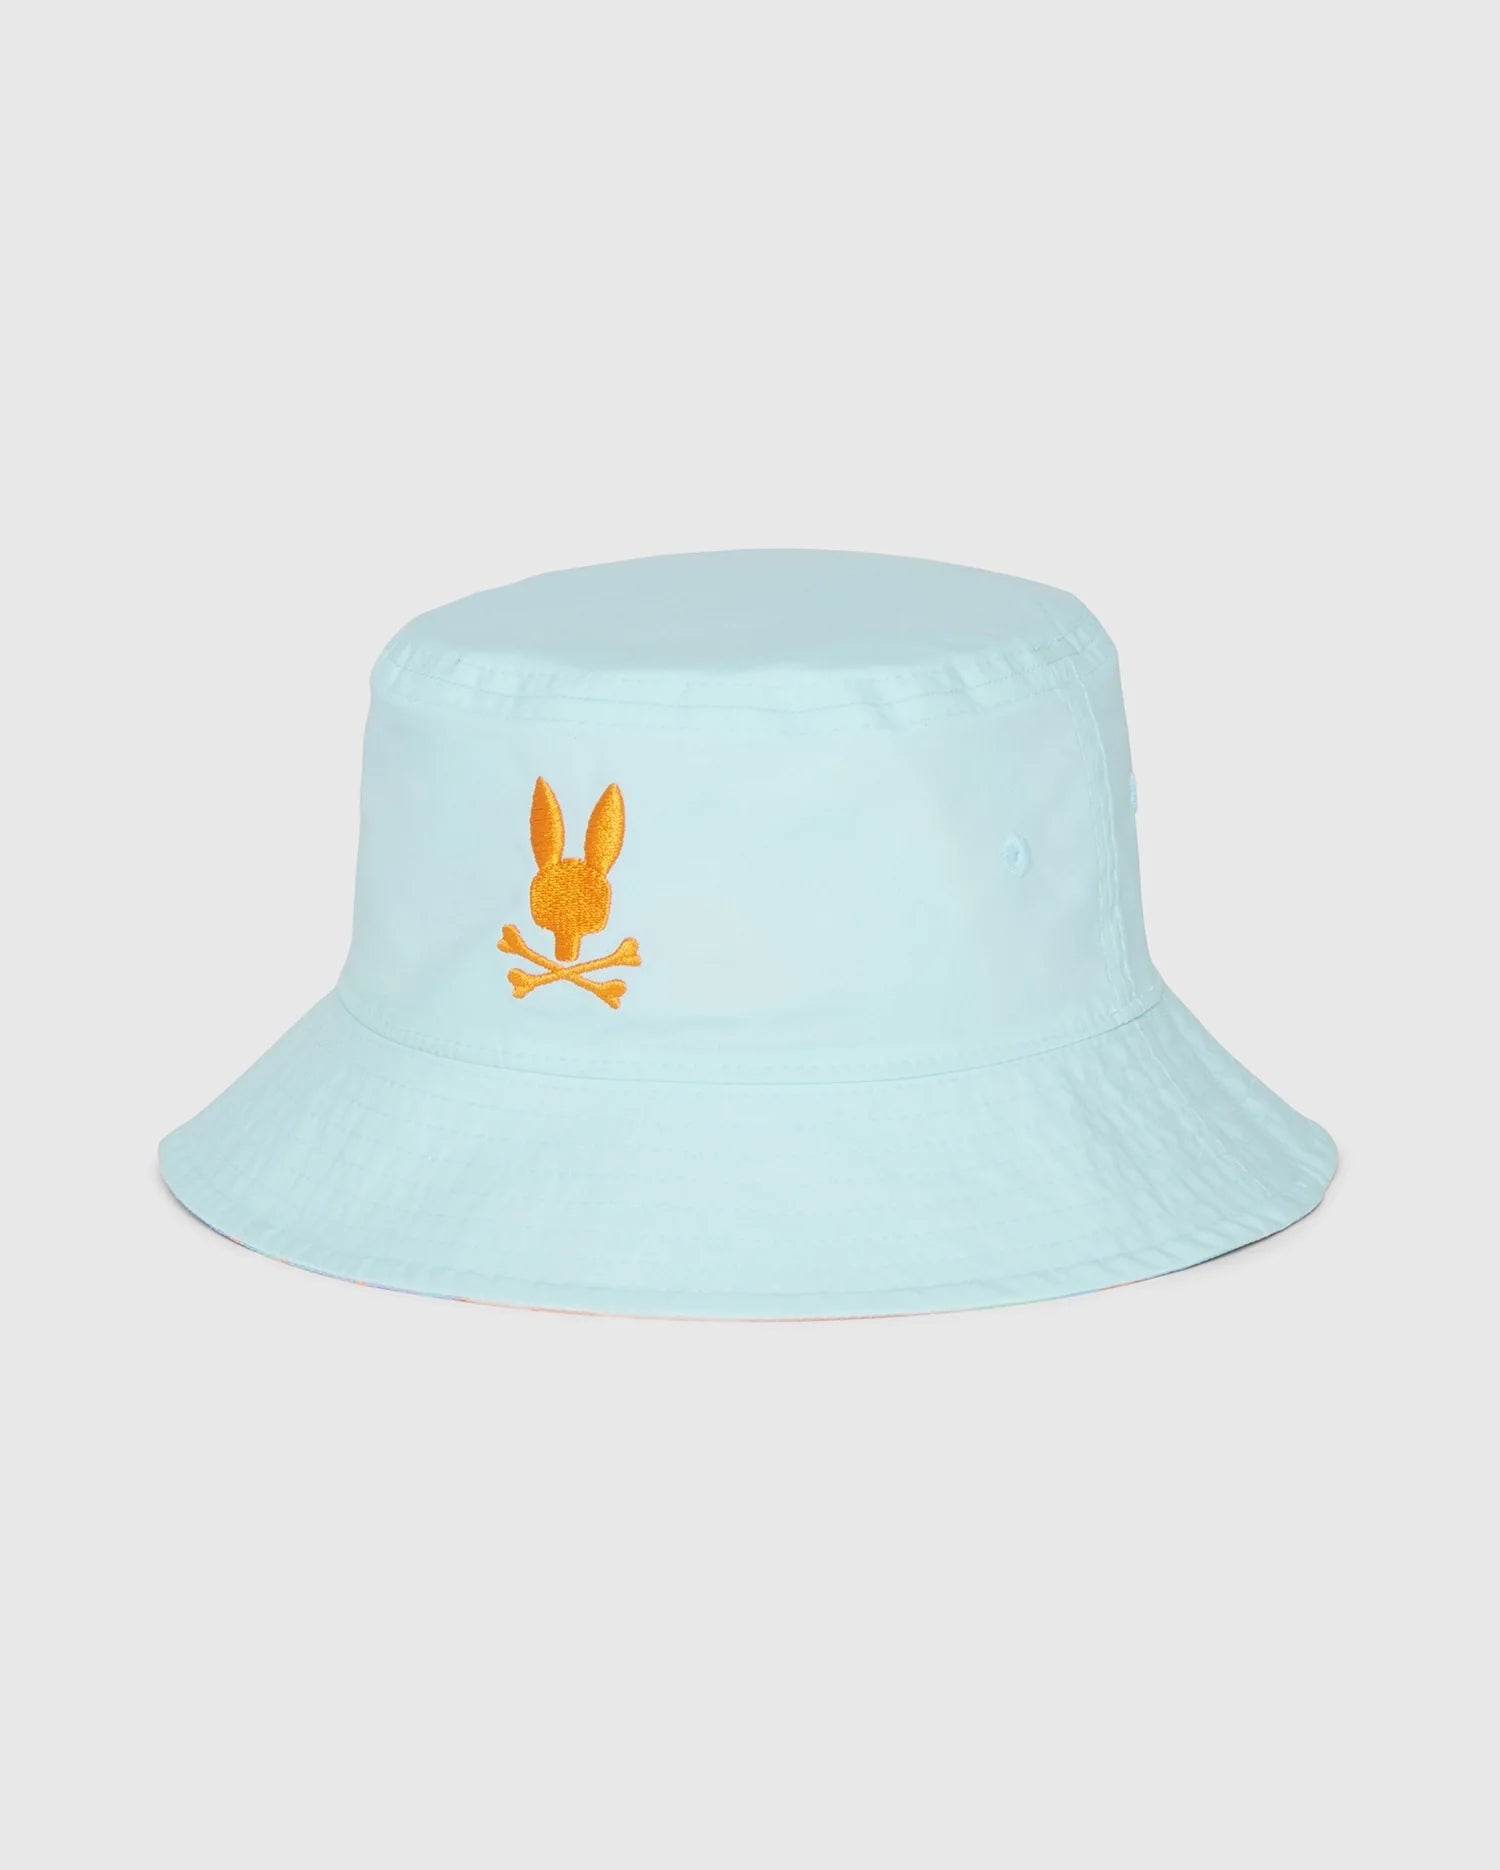 Shop the Best Beach Accessories from Psycho Bunny – Psycho Bunny Canada